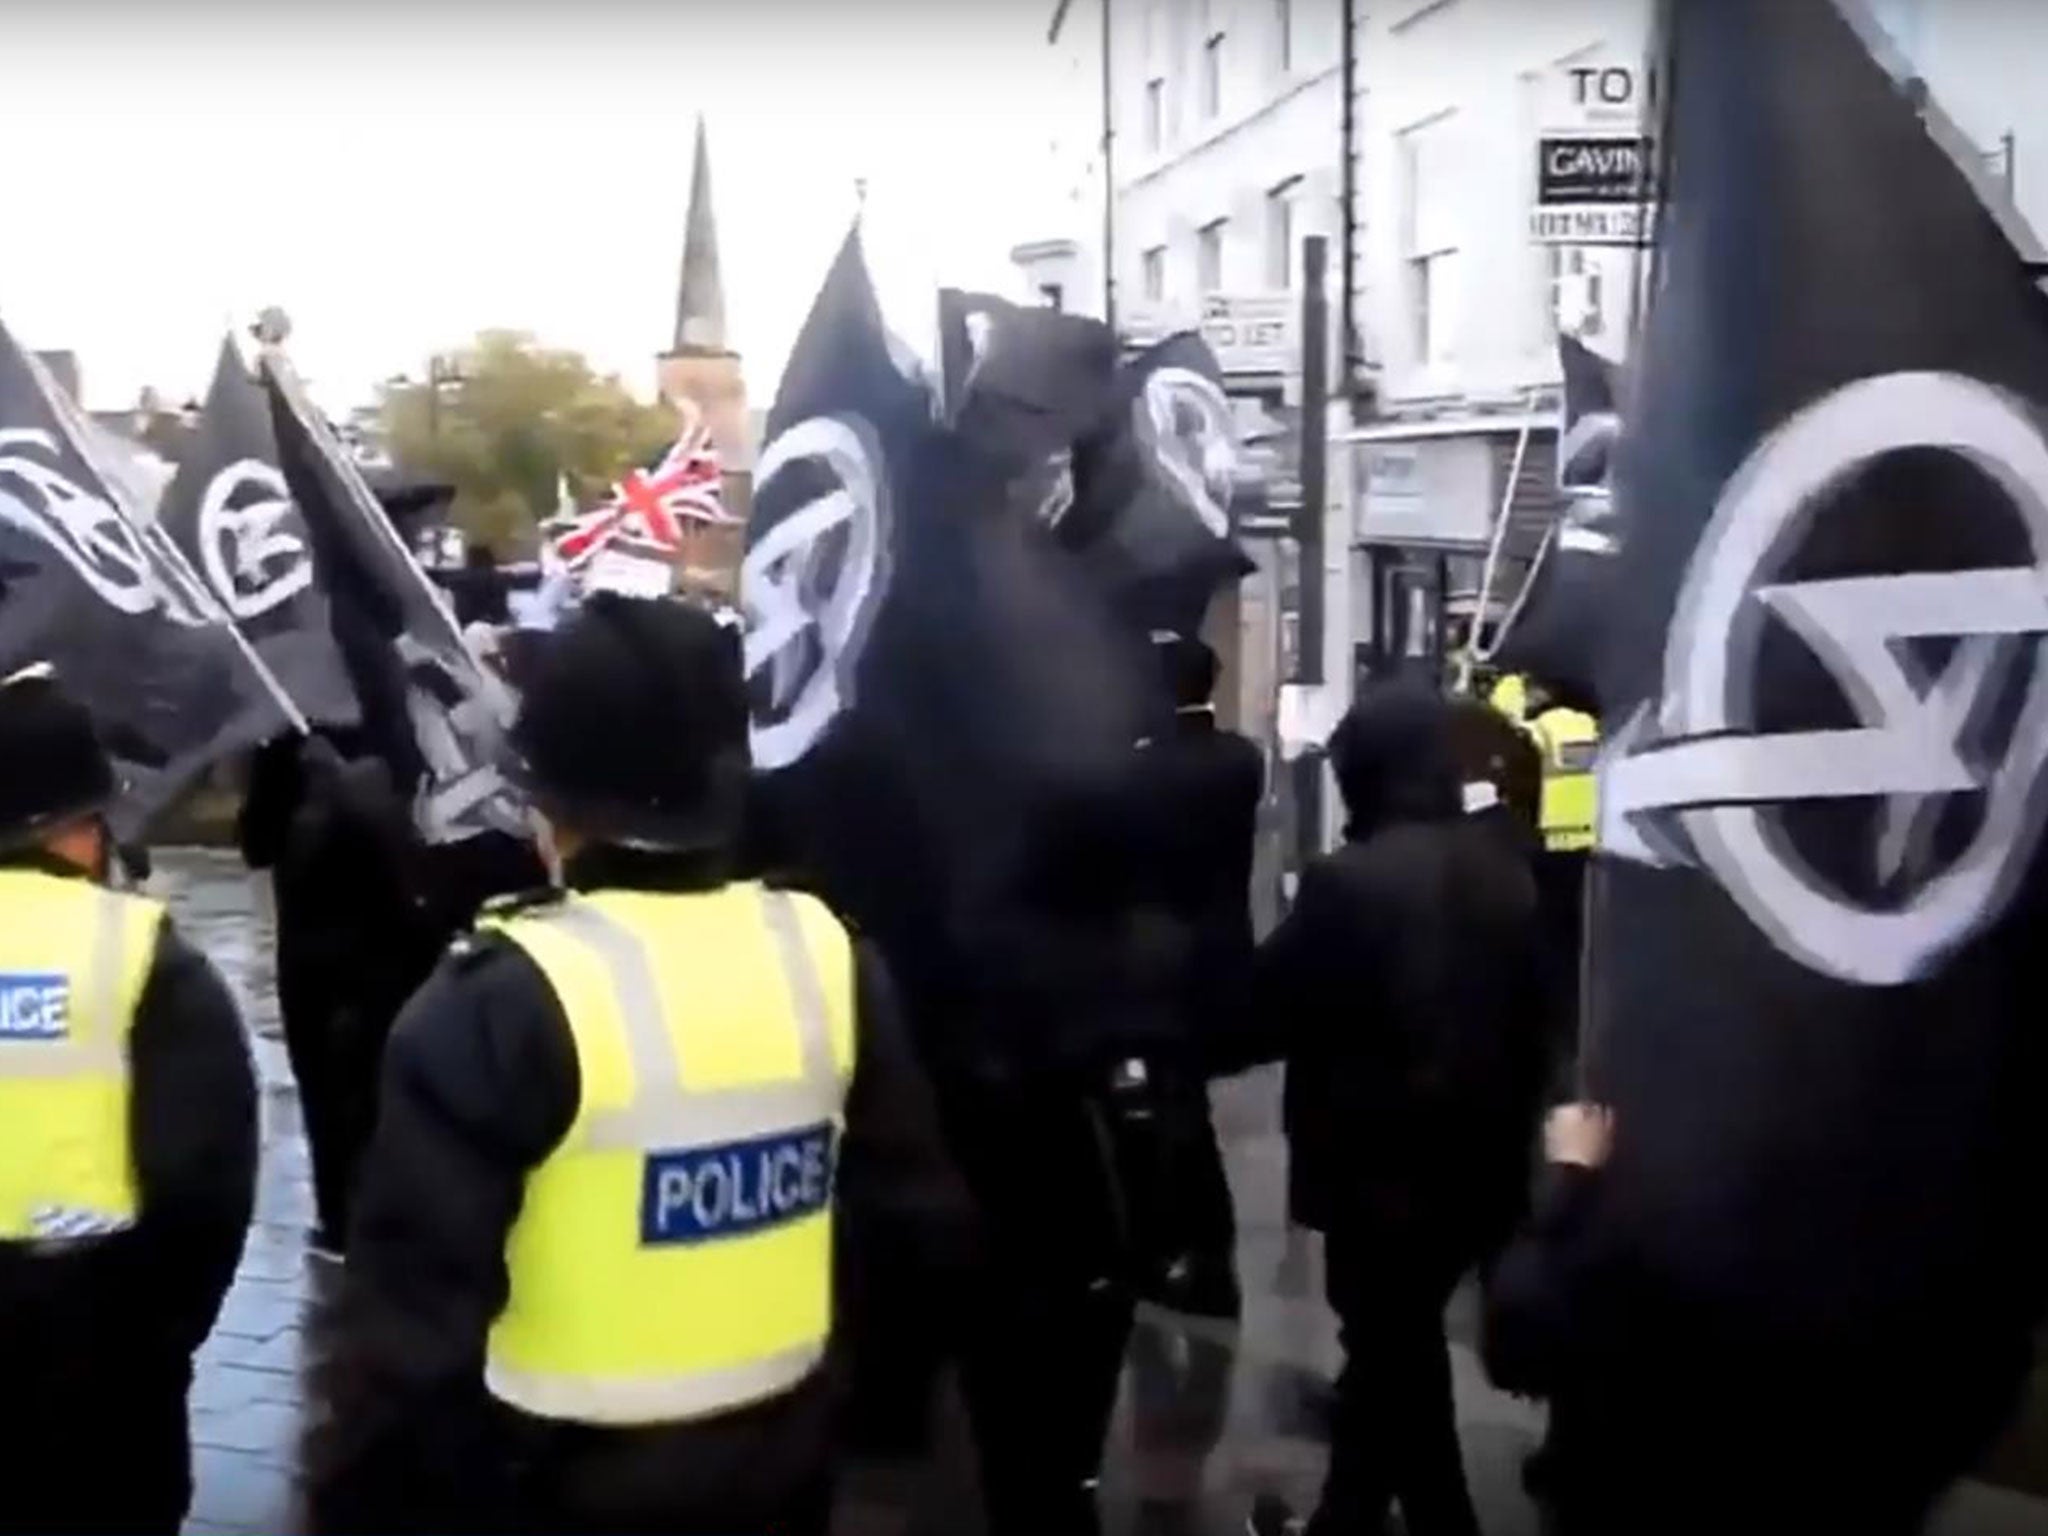 National Action was later banned as a neo-Nazi terrorist group in December 2016